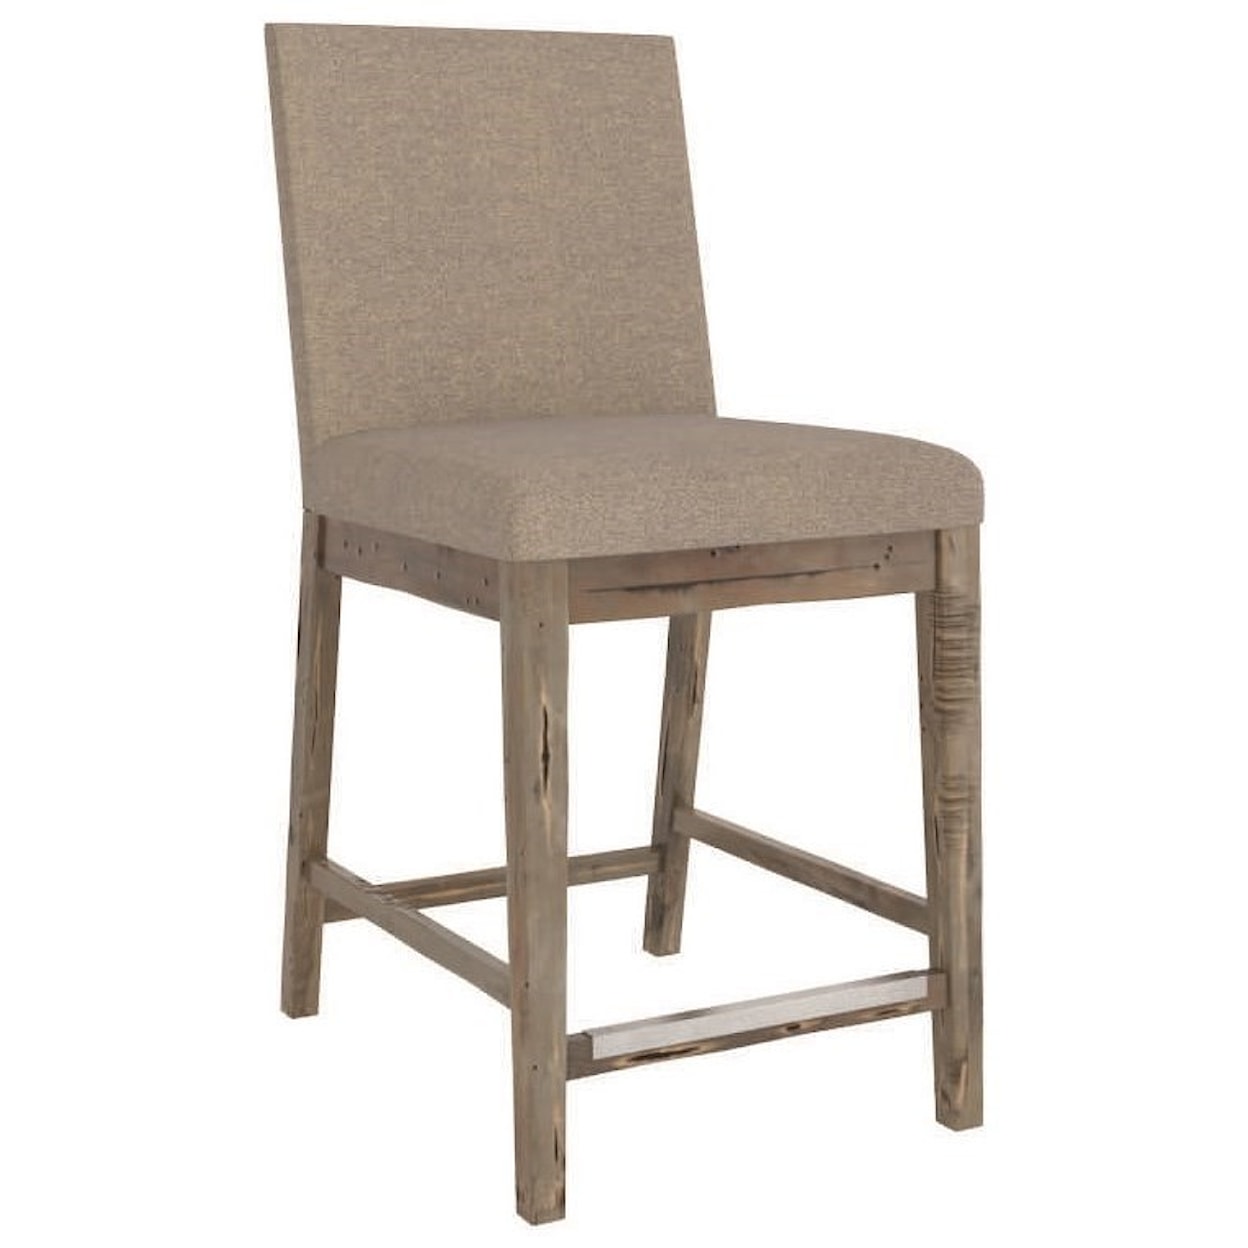 Canadel Champlain Customizable Upholstered Counter Stool